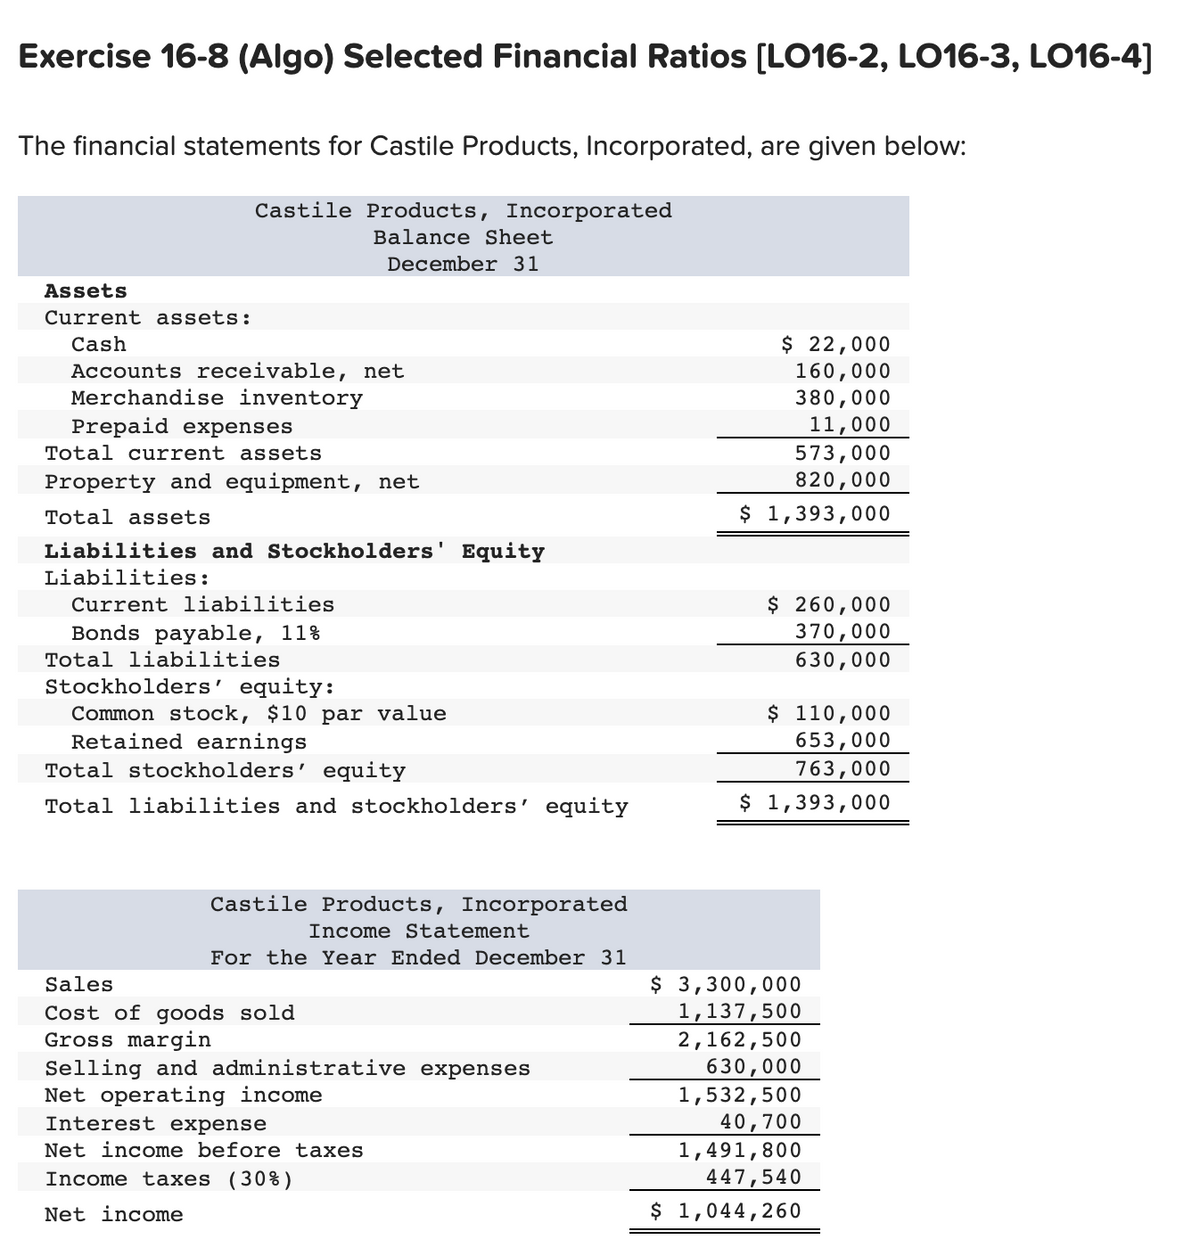 Exercise 16-8 (Algo) Selected Financial Ratios [LO16-2, LO16-3, LO16-4]
The financial statements for Castile Products, Incorporated, are given below:
Castile Products, Incorporated
Balance Sheet
December 31
Assets
Current assets:
$ 22,000
160,000
380,000
Cash
Accounts receivable, net
Merchandise inventory
11,000
573,000
Prepaid expenses
Total current assets
Property and equipment, net
820,000
Total assets
$ 1,393,000
Liabilities and Stockholders' Equity
Liabilities:
$ 260,000
370,000
630,000
Current liabilities
Bonds payable, 11%
Total liabilities
Stockholders' equity:
Common stock, $10 par value
Retained earnings
Total stockholders' equity
$ 110,000
653,000
763,000
Total liabilities and stockholders' equity
$ 1,393,000
Castile Products, Incorporated
Income Statement
For the Year Ended December 31
$ 3,300,000
1,137,500
2,162,500
630,000
1,532,500
40,700
Sales
Cost of goods sold
Gross margin
Selling and administrative expenses
Net operating income
Interest expense
1,491,800
447,540
Net income before taxes
Income taxes (30%)
Net income
$ 1,044,260
